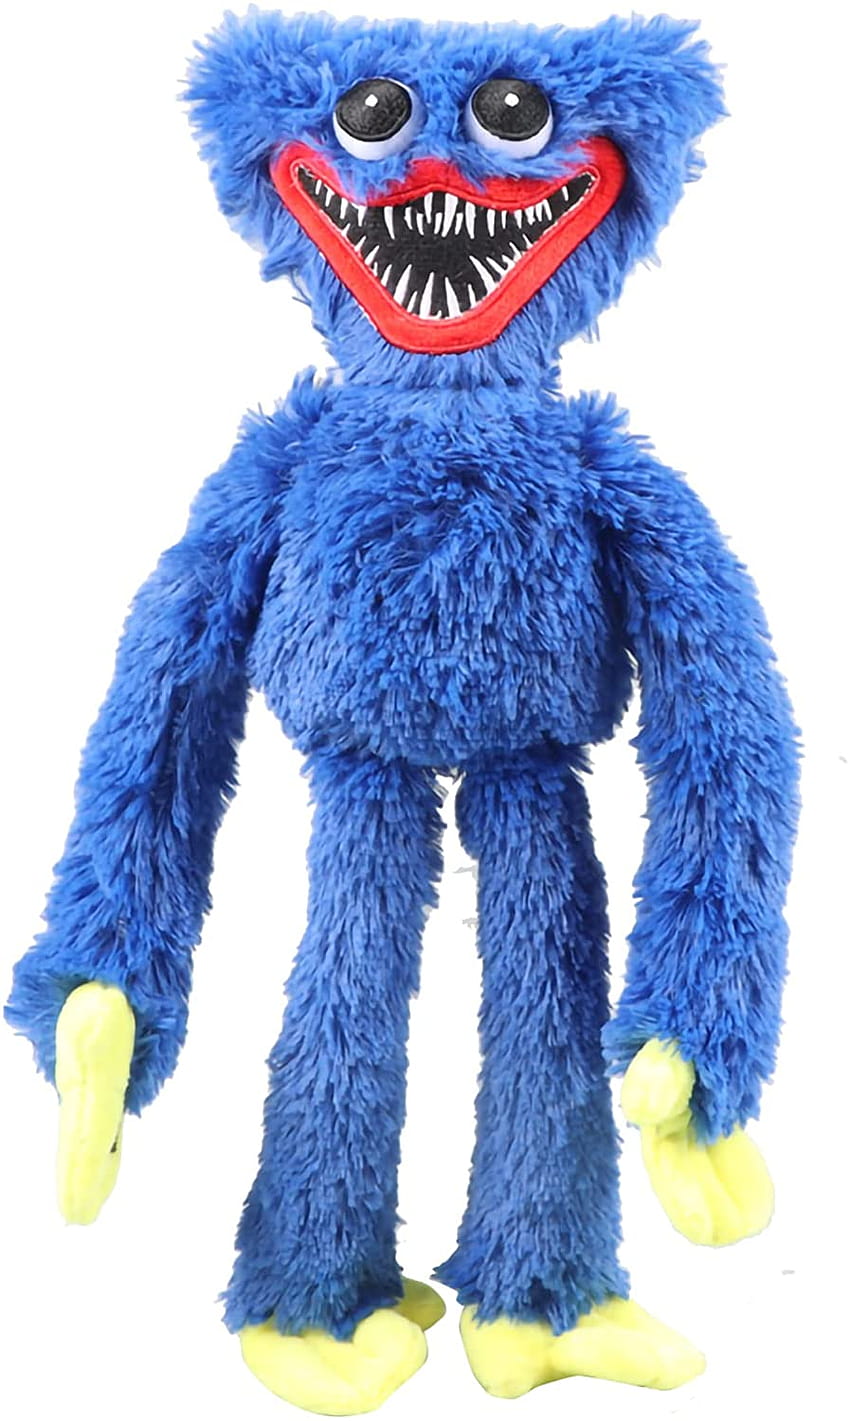 Huggy Wuggy Plush Toy, Blue Scary and Funny Plush Doll, Suitable for Christmas Fans and Friends Beautifully Plush Doll Gifts 15.7 in HD phone wallpaper